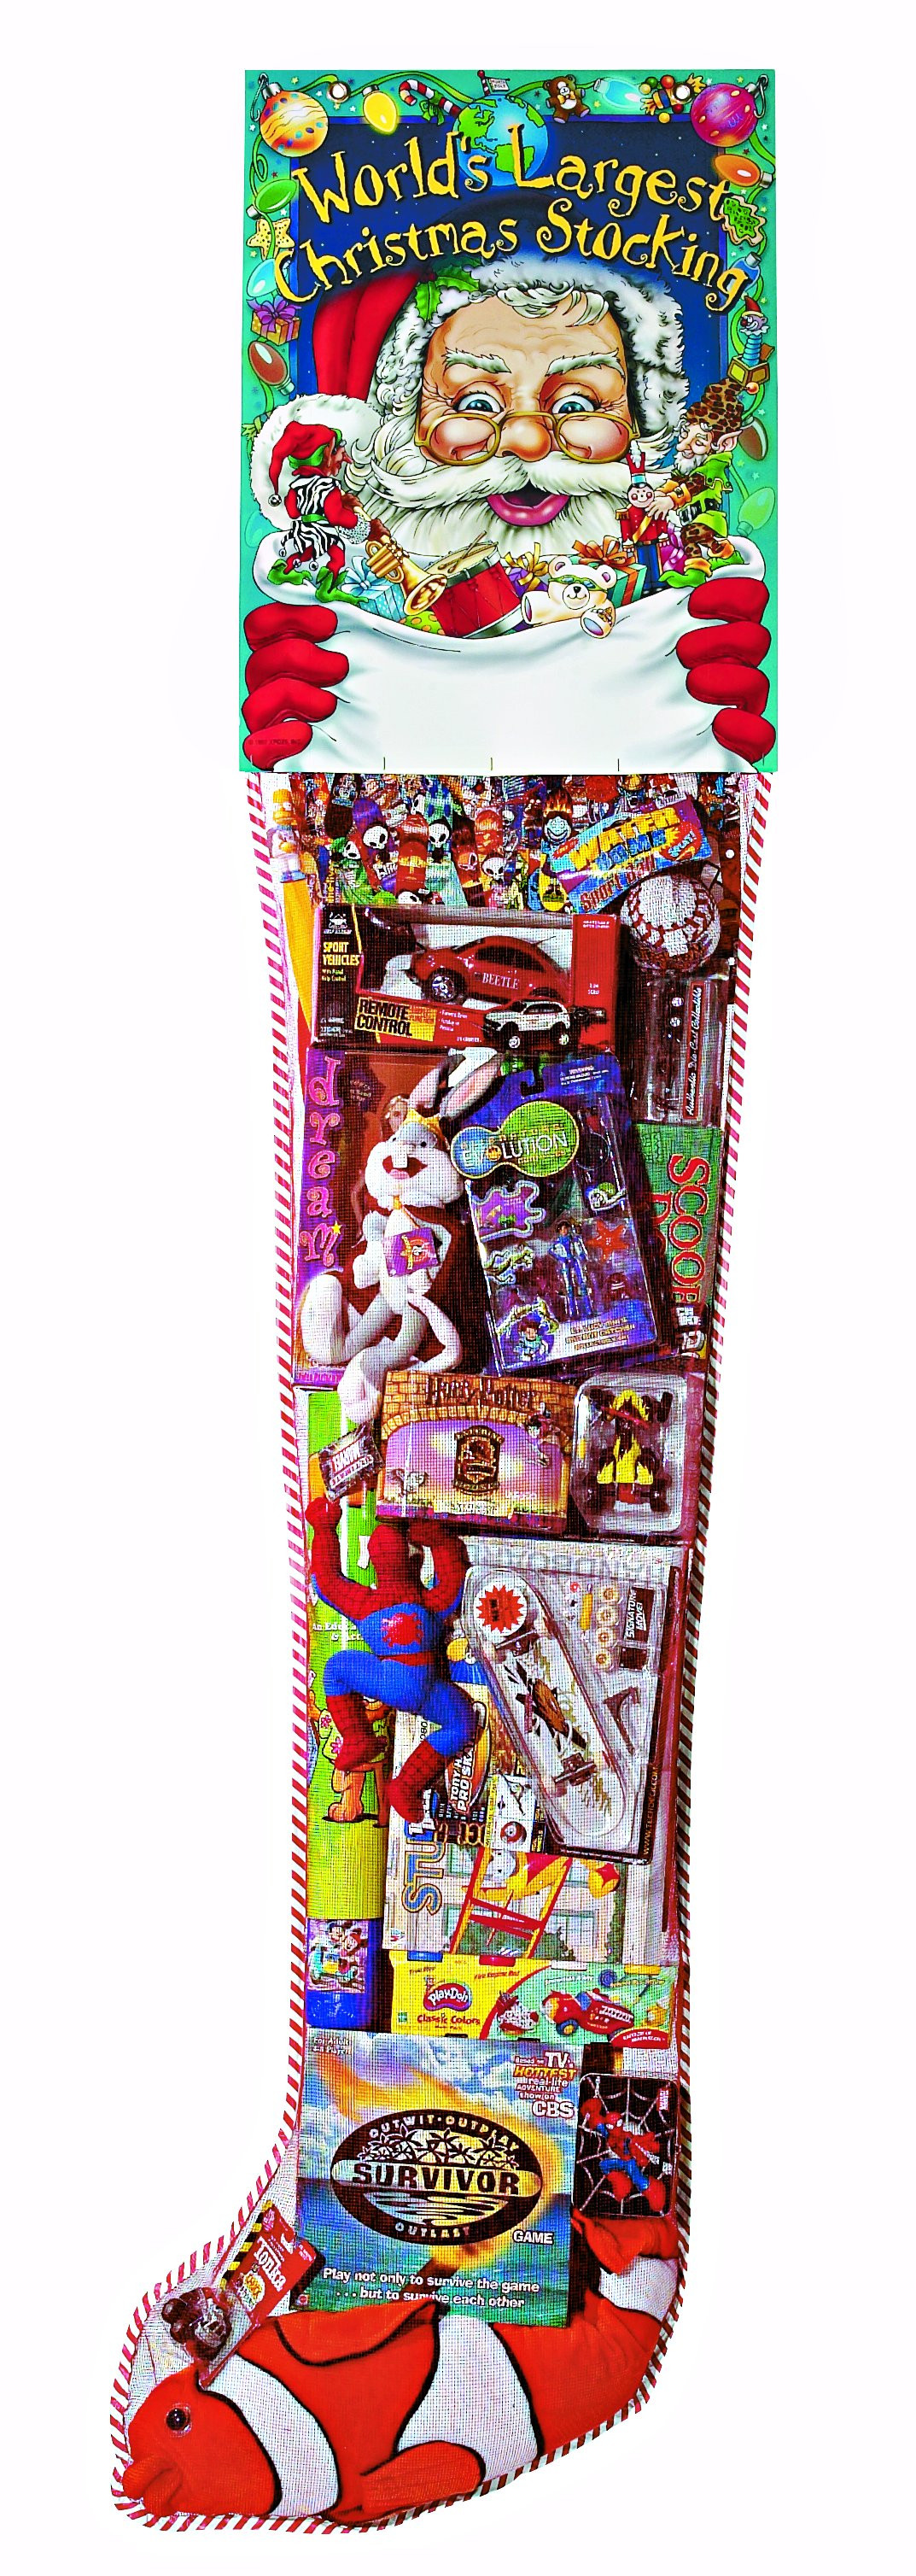 Candy Filled Christmas Stockings
 GIANT TOY FILLED STOCKINGS 6 Foot Stockings